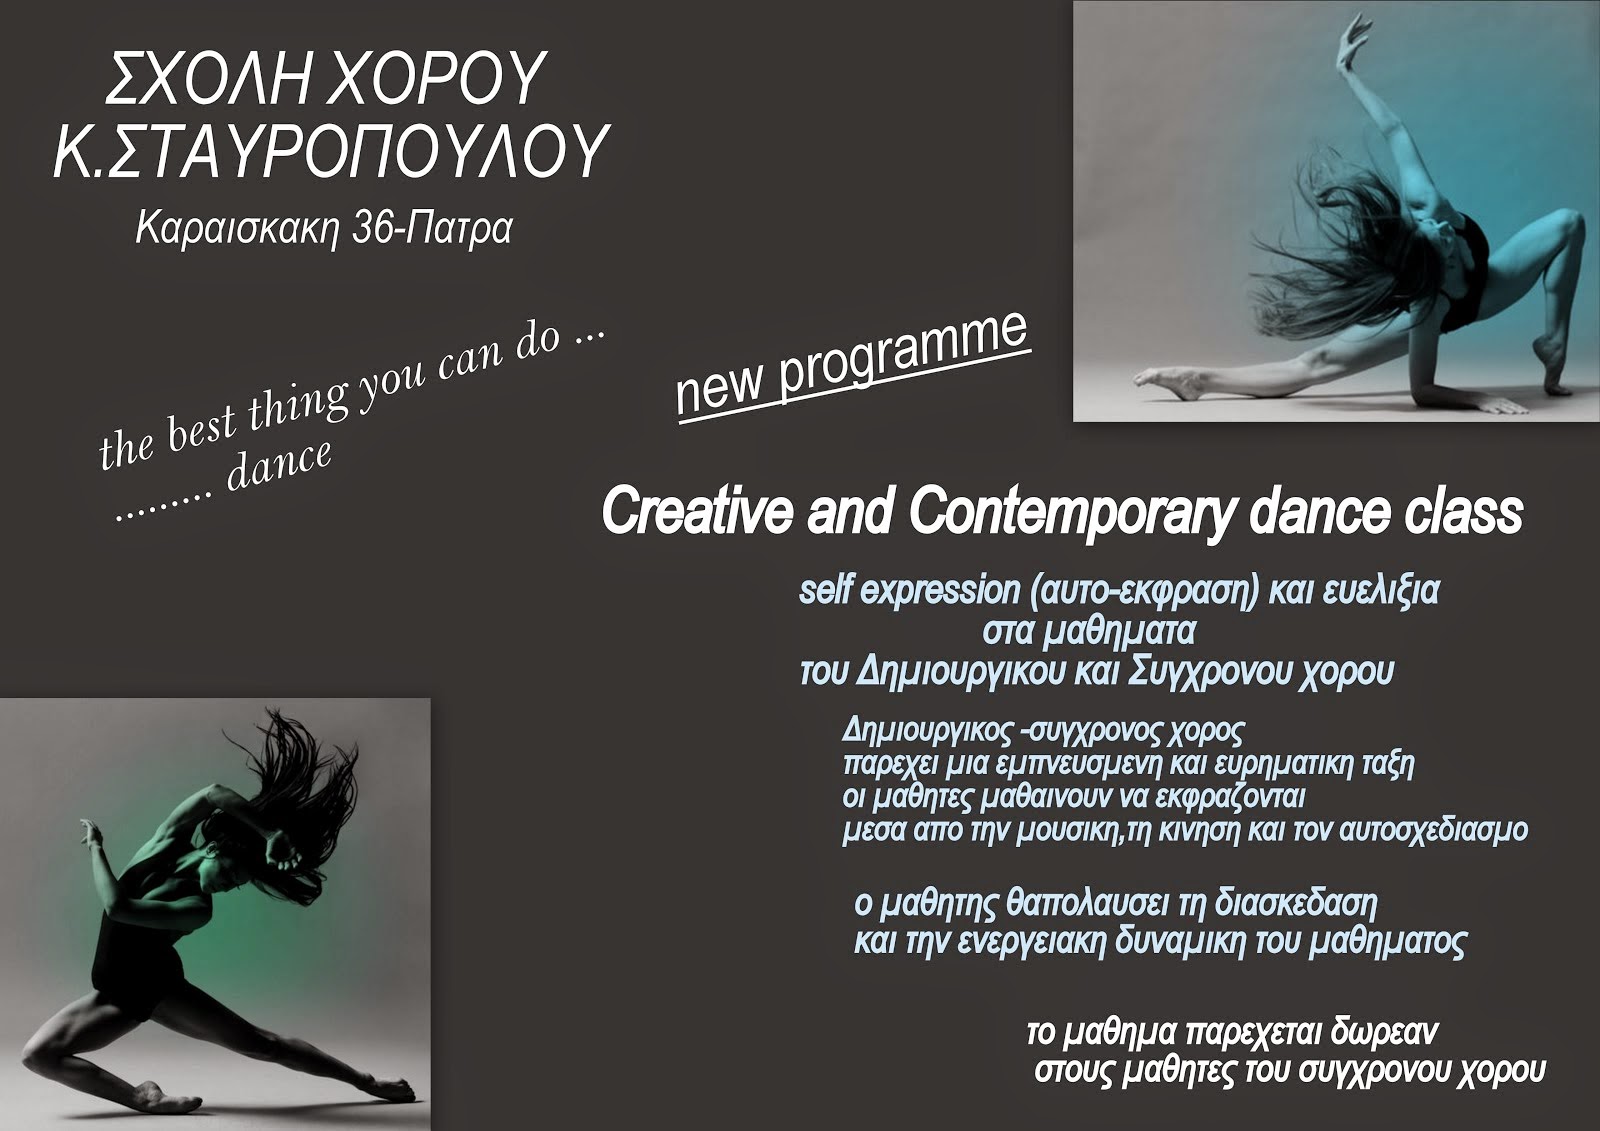 CREATIVE AND CONTEMPORARY DANCE CLASS